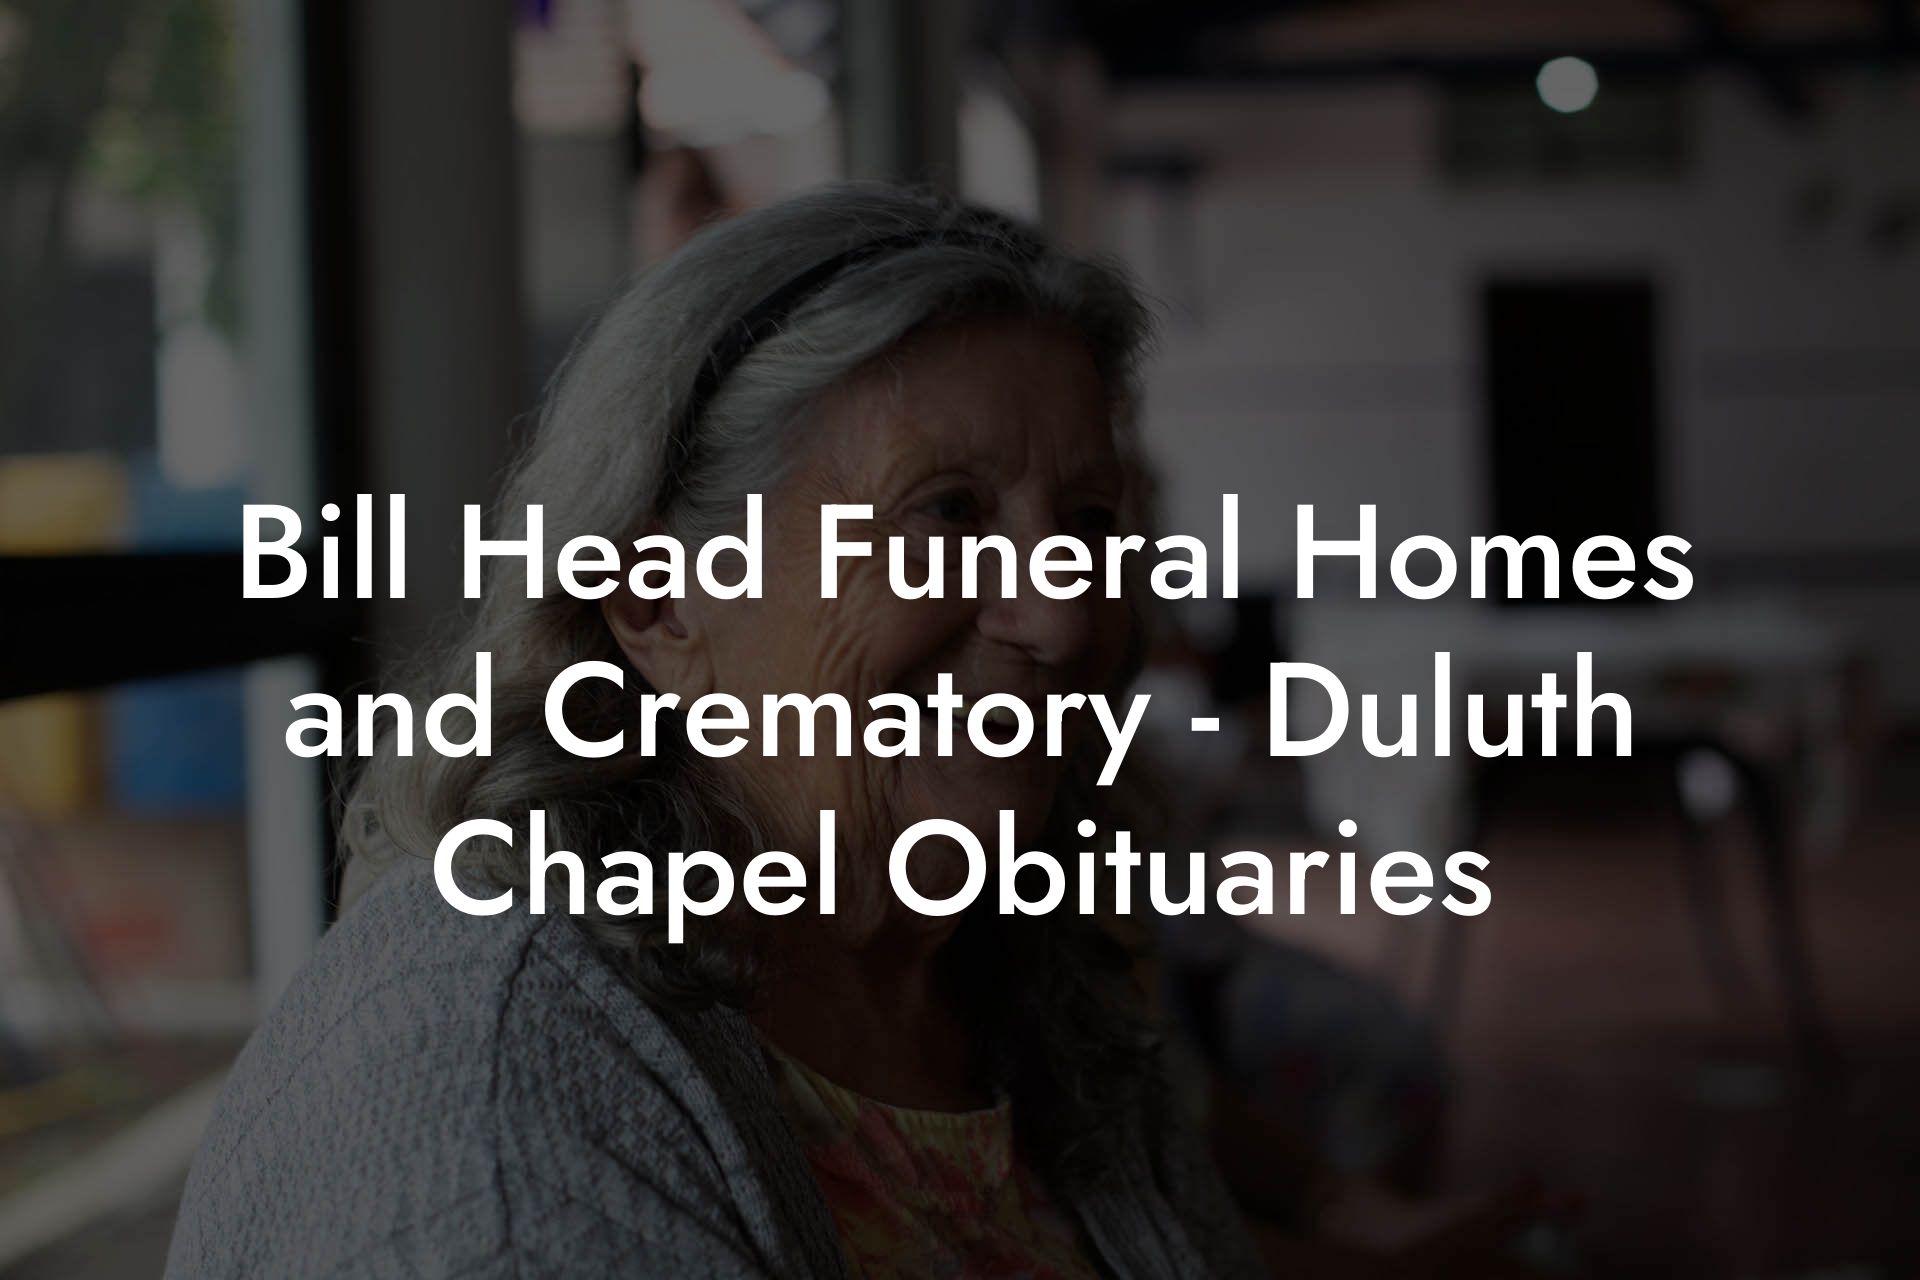 Bill Head Funeral Homes and Crematory - Duluth Chapel Obituaries